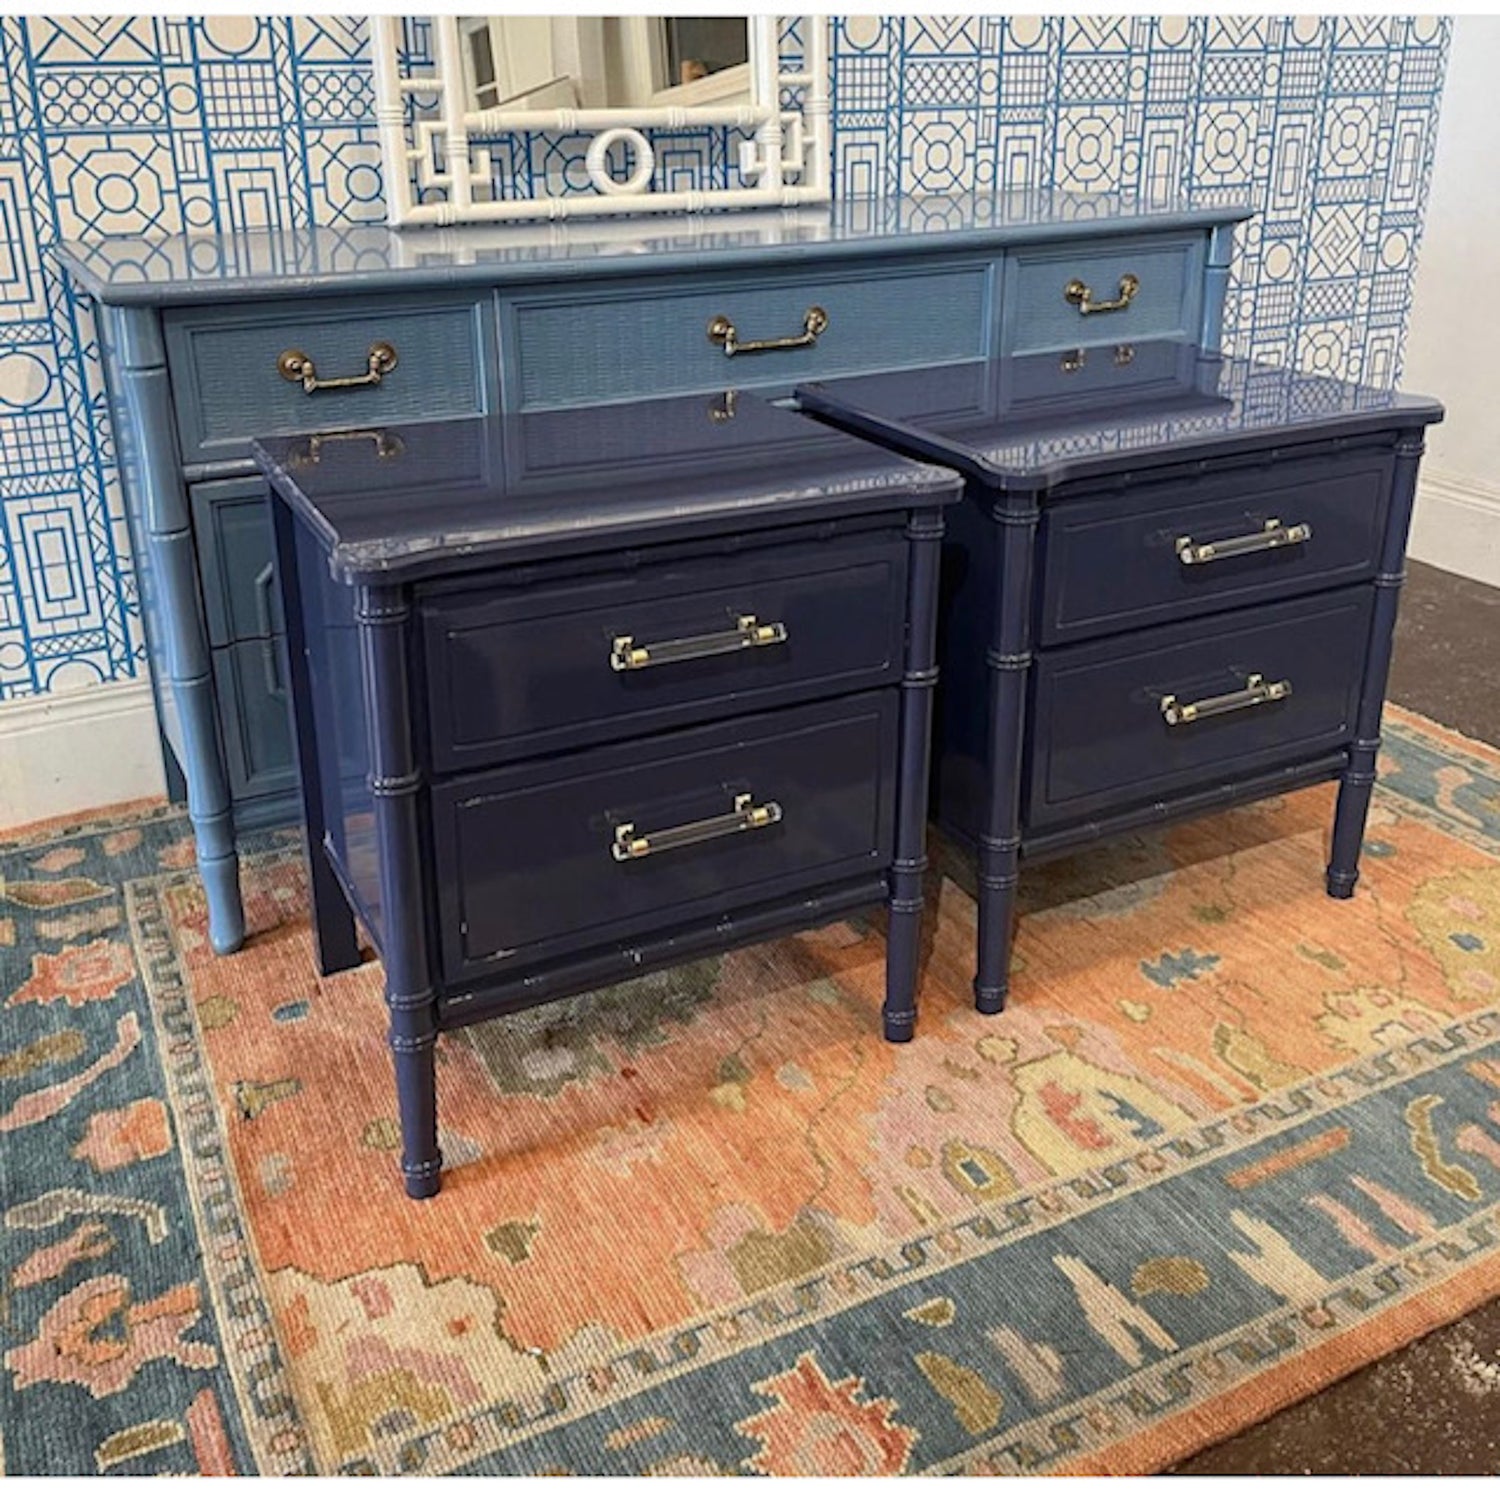 Custom lacquered faux bamboo dresser lacquered in light blue and pair of lacquered side tables in hale navy. All by Winston's Collection located in Winston Salem, NC. All three custom pieces are sitting on a colorful vintage rug with a faux bamboo mirror lacquered in white resting against  a blue and white wallpapered wall.